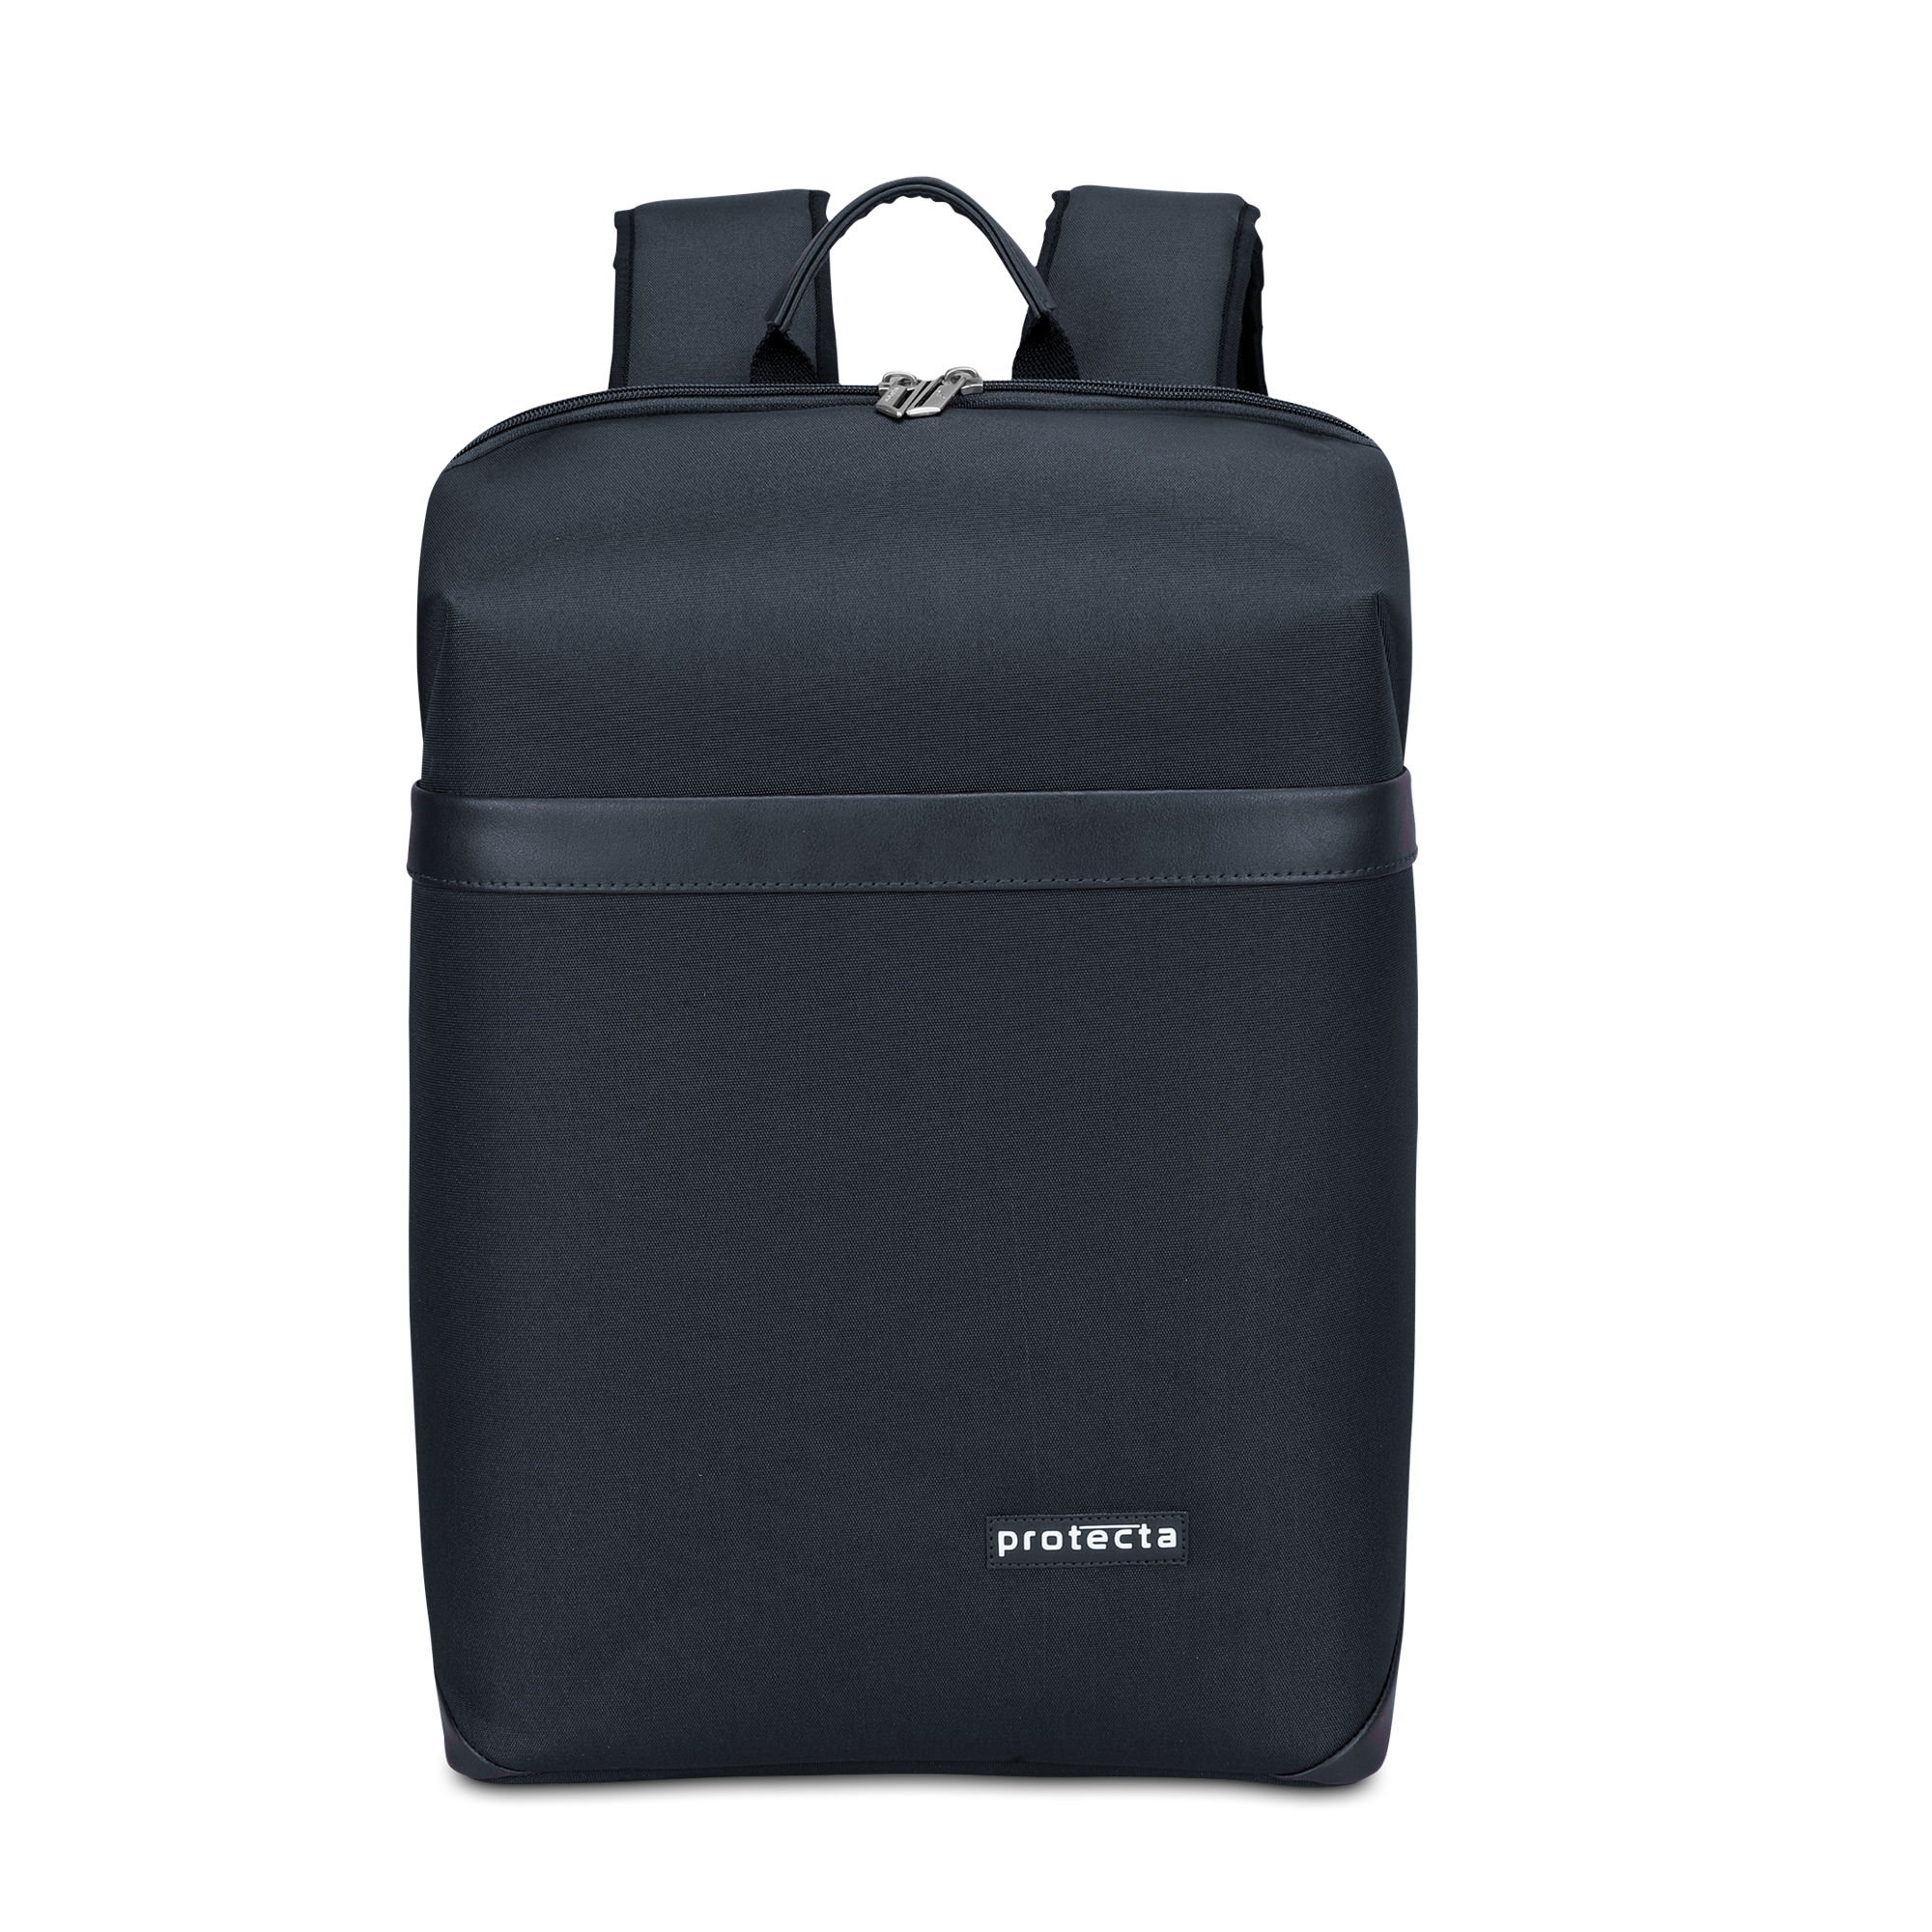 Black | Protecta Early Lead Anti-Theft Office Laptop Backpack - Main